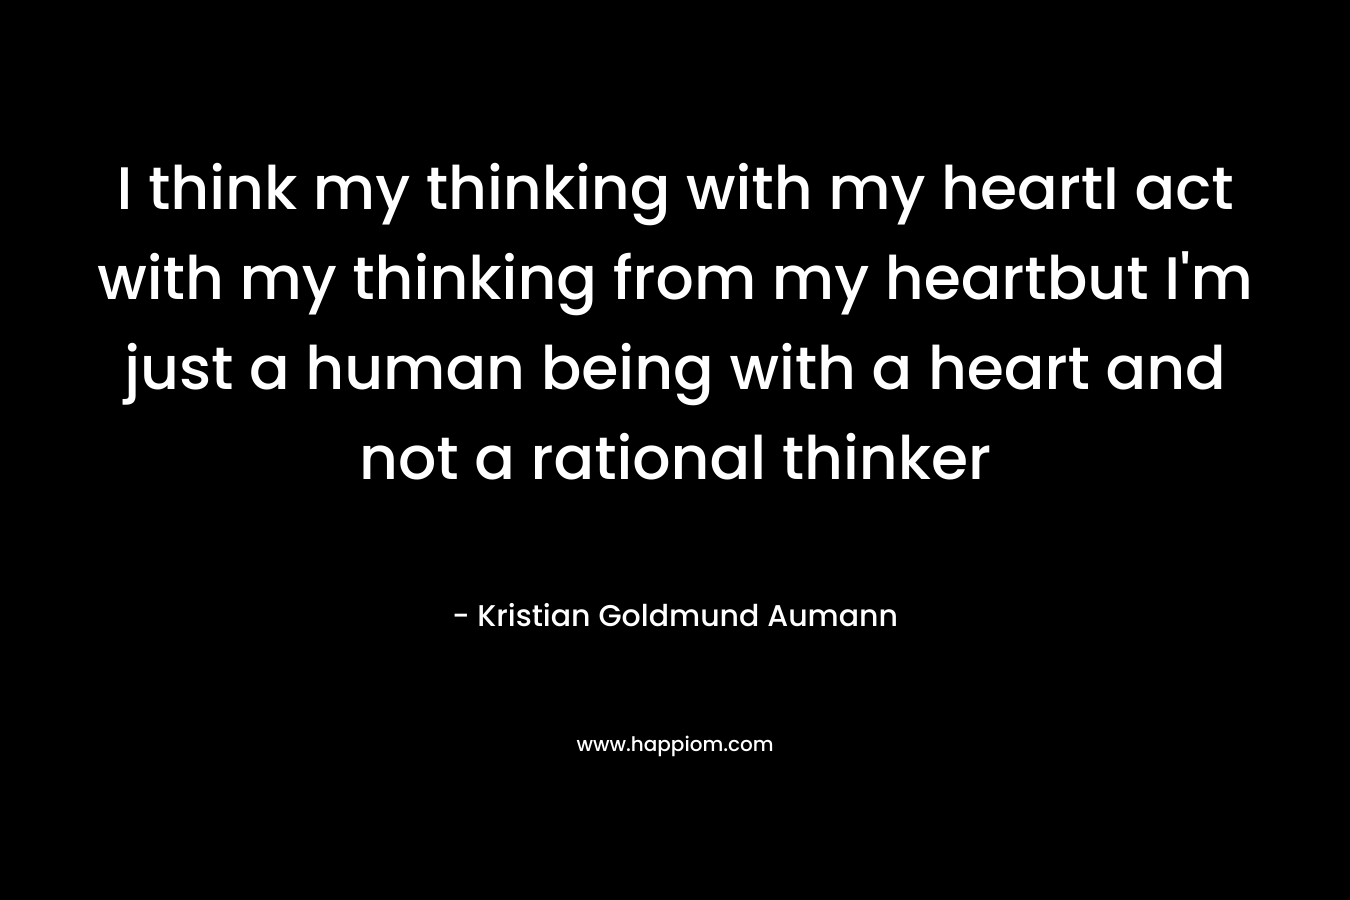 I think my thinking with my heartI act with my thinking from my heartbut I’m just a human being with a heart and not a rational thinker – Kristian Goldmund Aumann